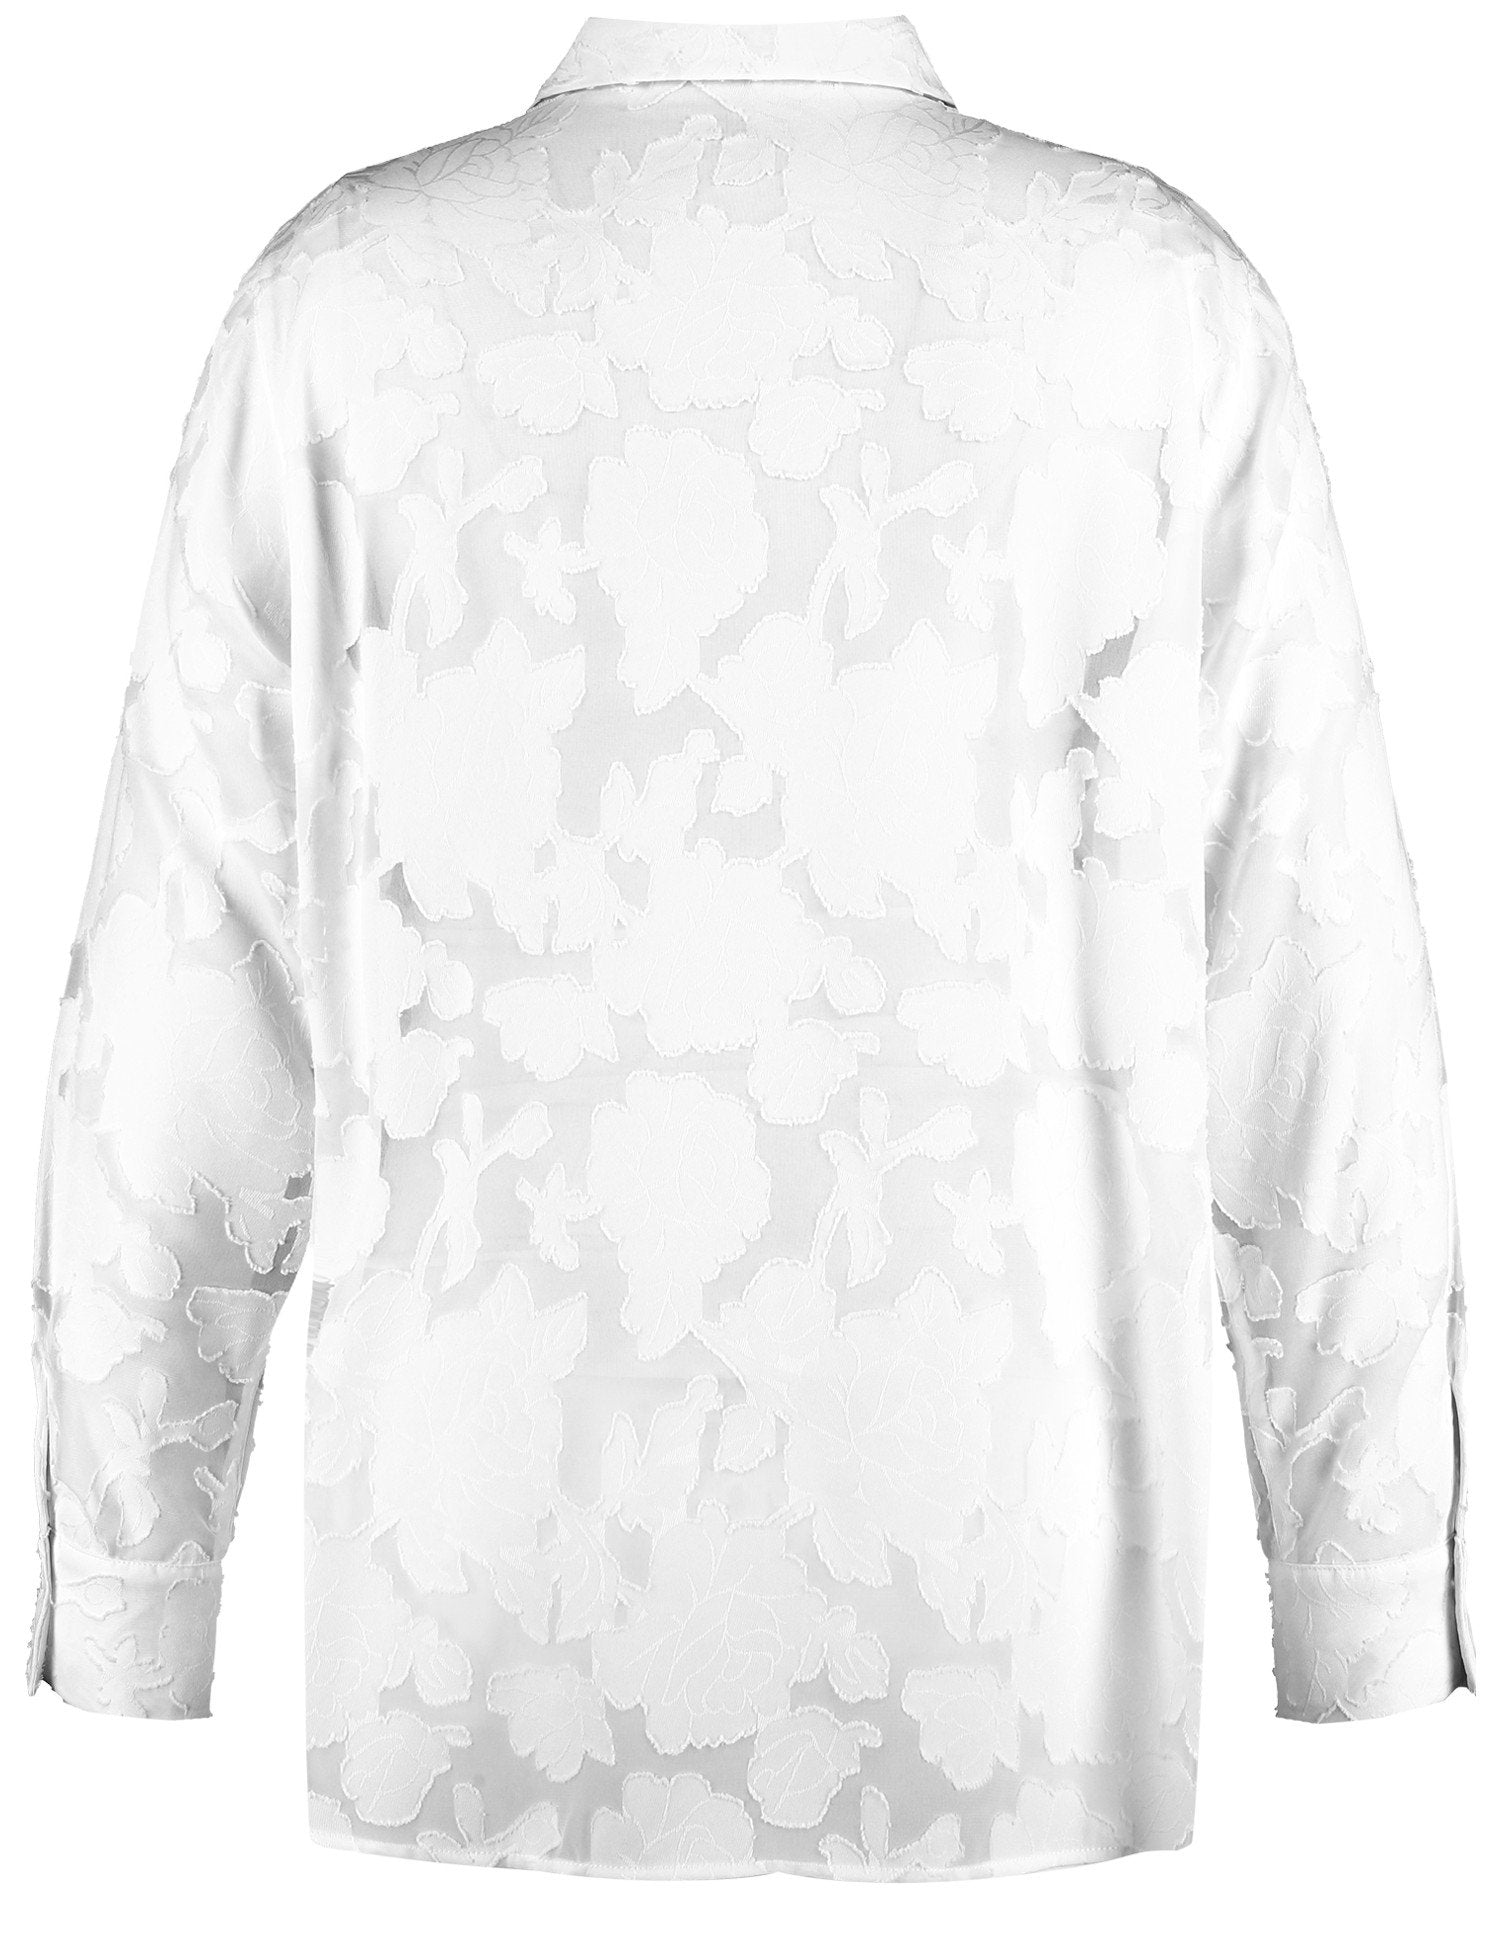 Blouse With A Sheer Floral Pattern_460013-21015_9600_07